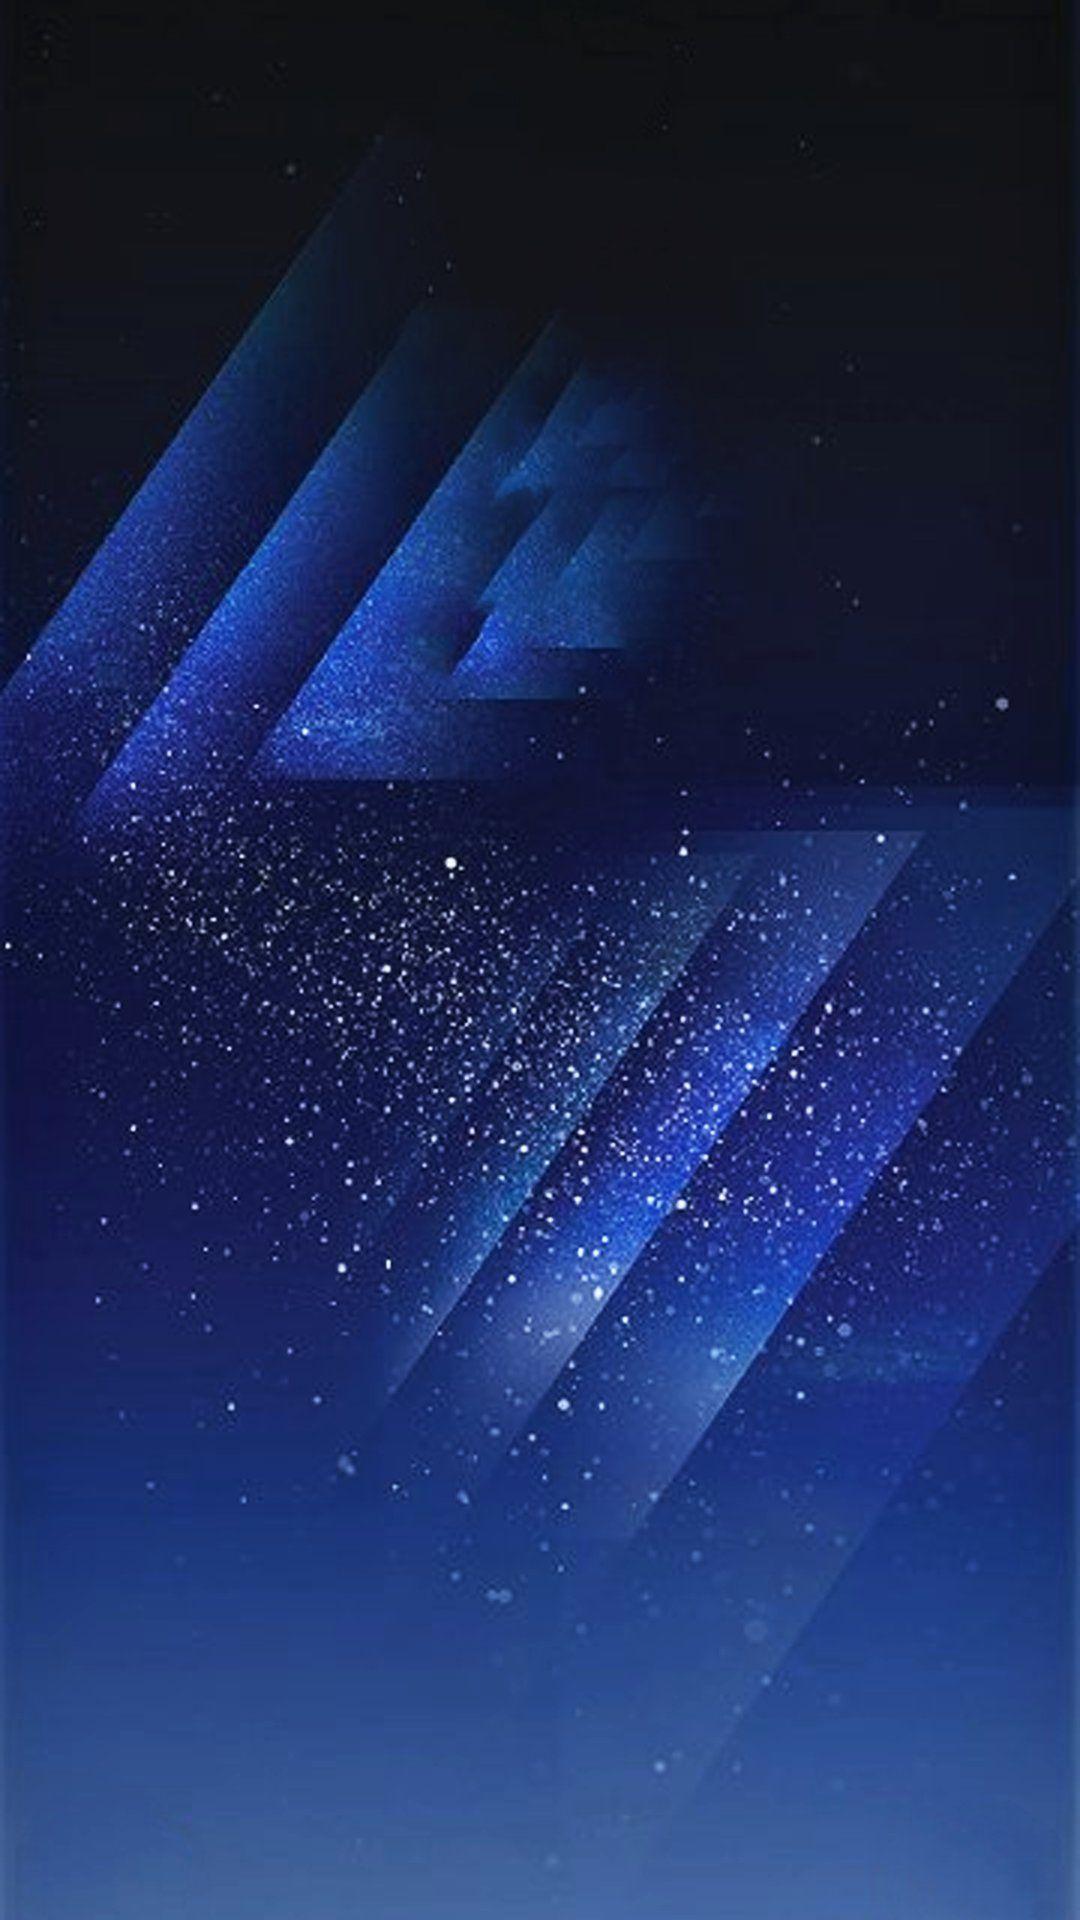 Samsung Galaxy S8 stock wallpaper are here, or are they?